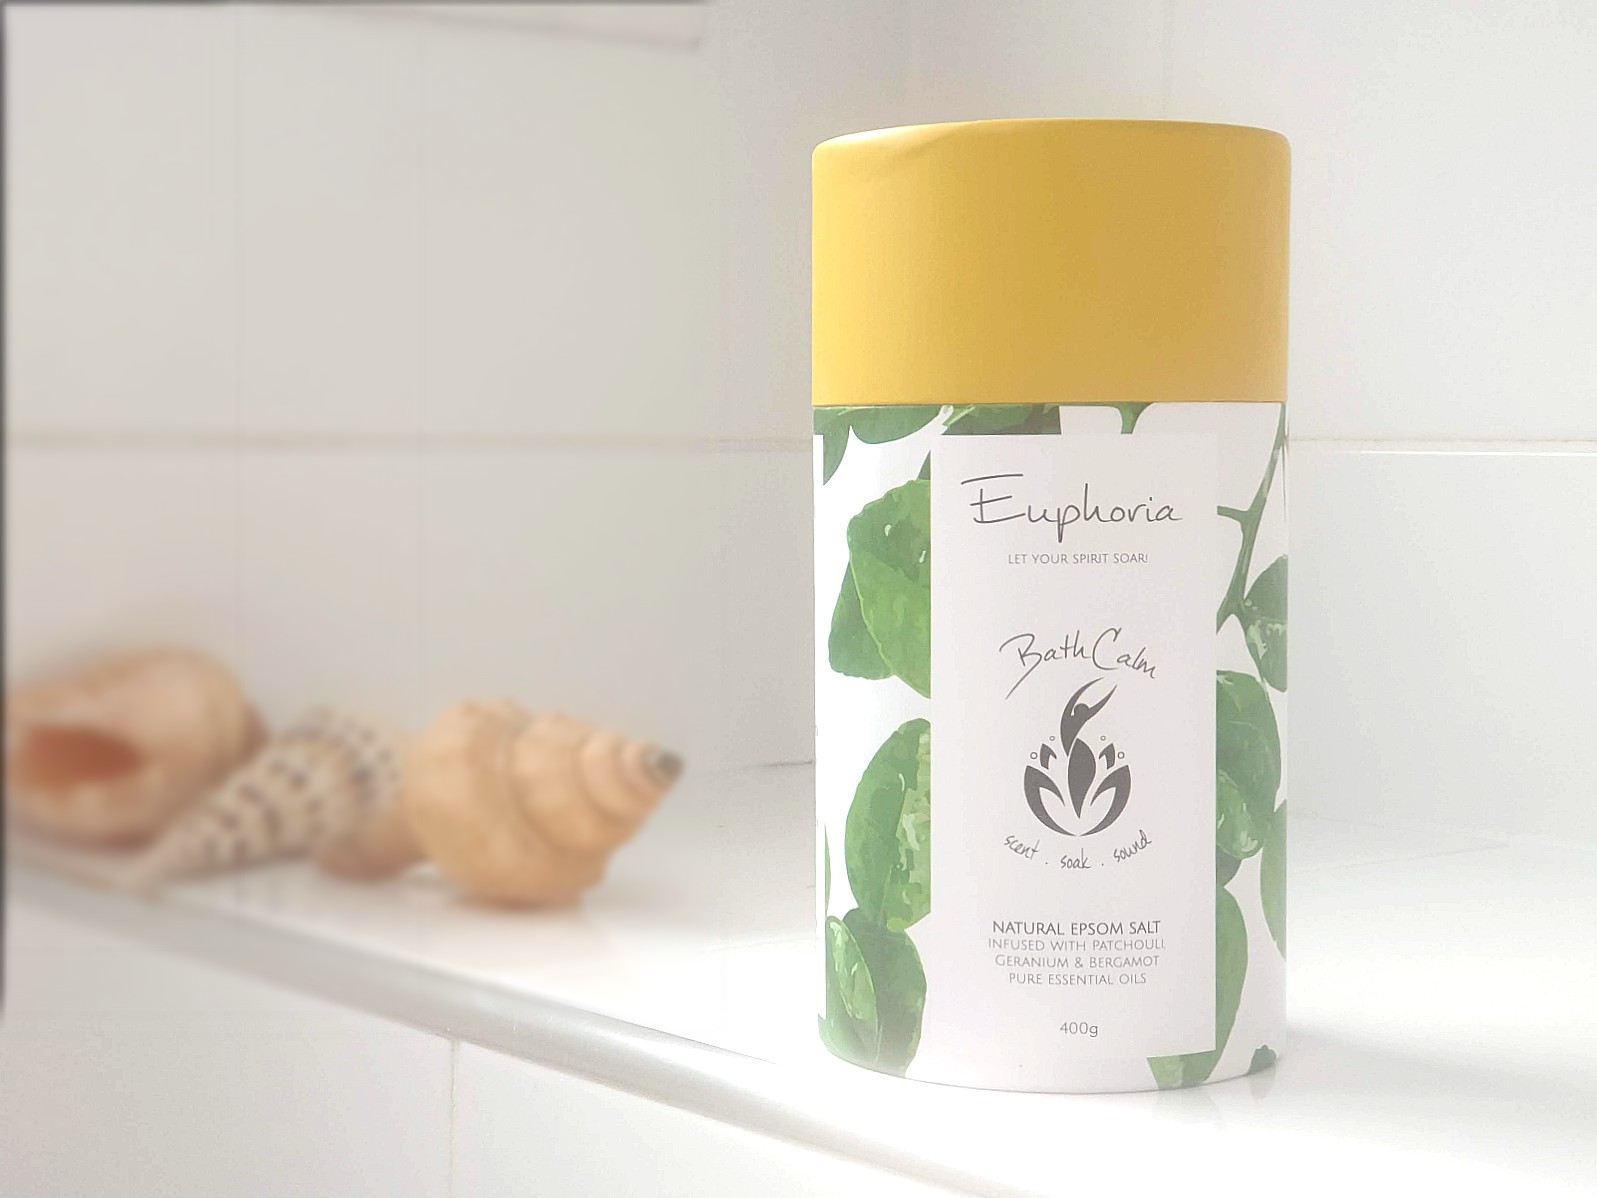 Turn your everyday bath and shower time into a rich experience, with an indulgent Euphoria Bath Meditation Soak.